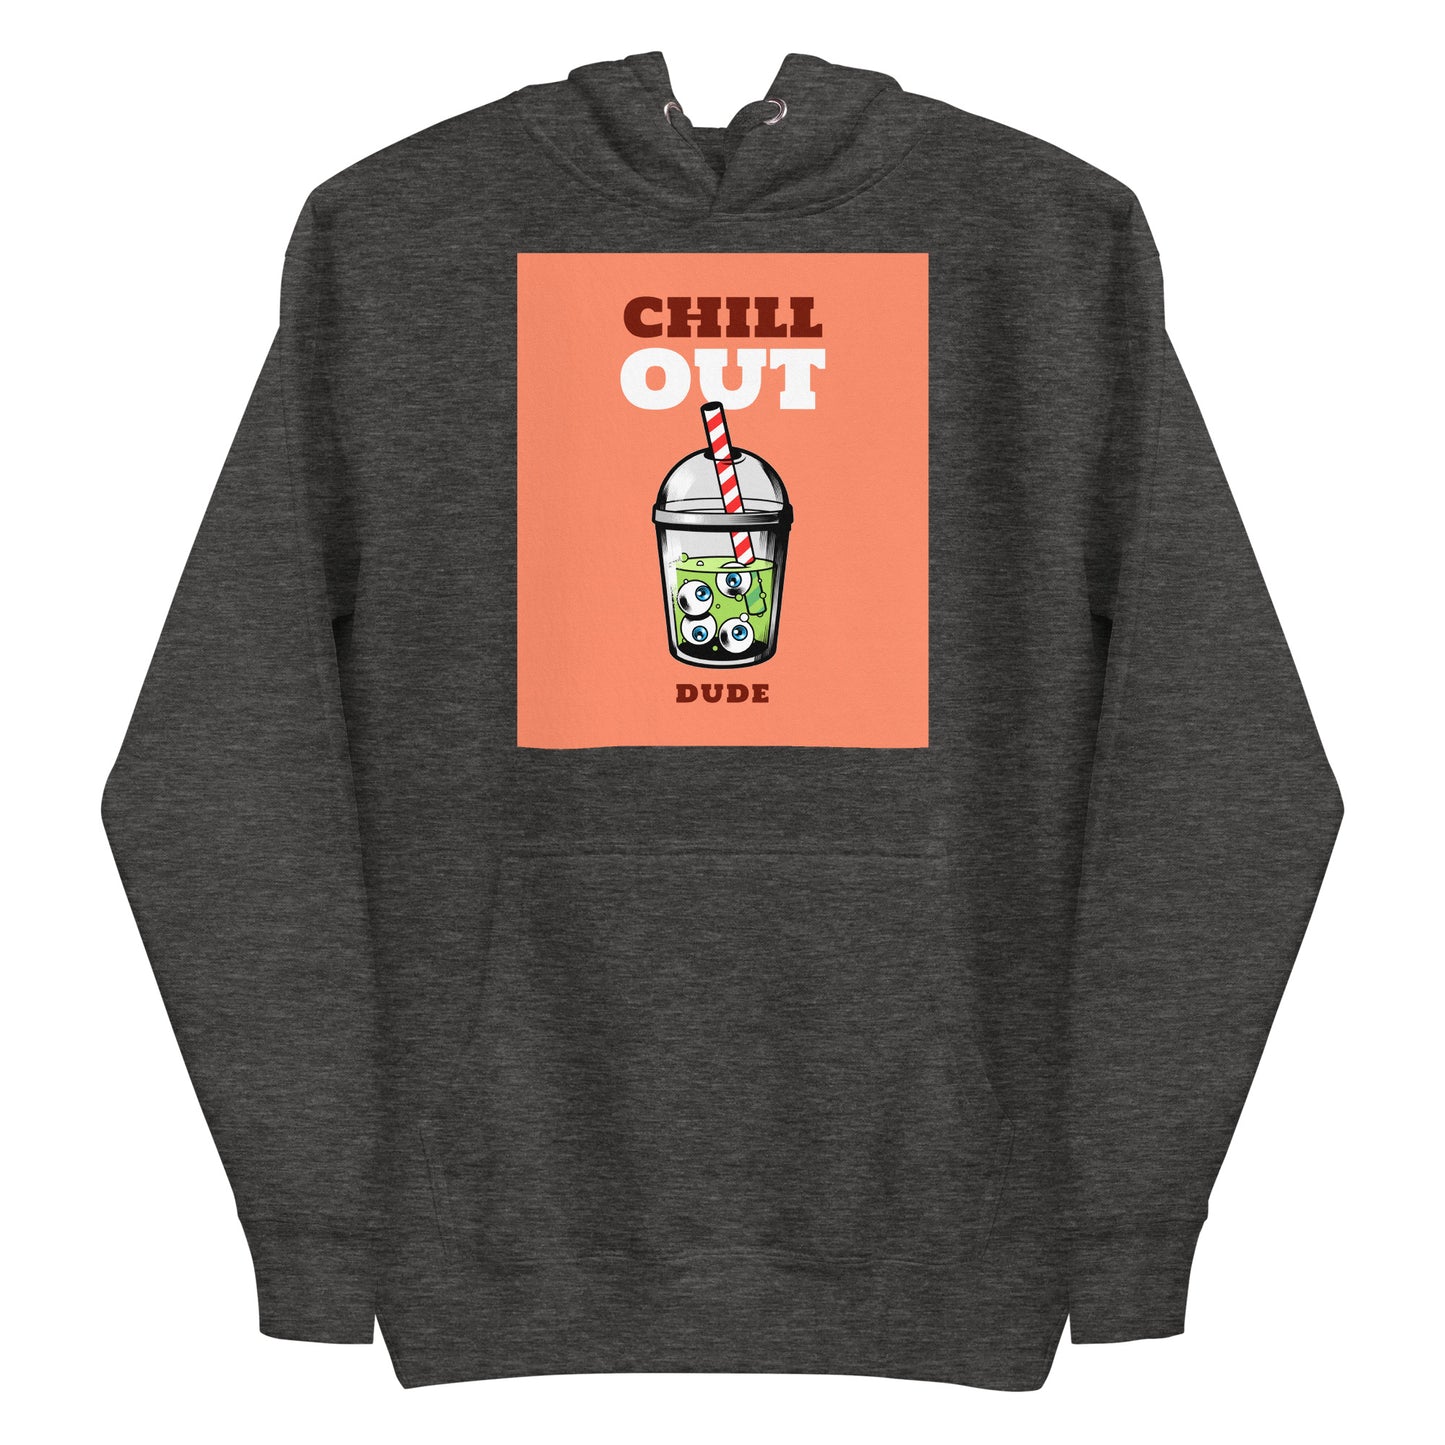 CHILL OUT DUDE | Women's Premium Hoodie